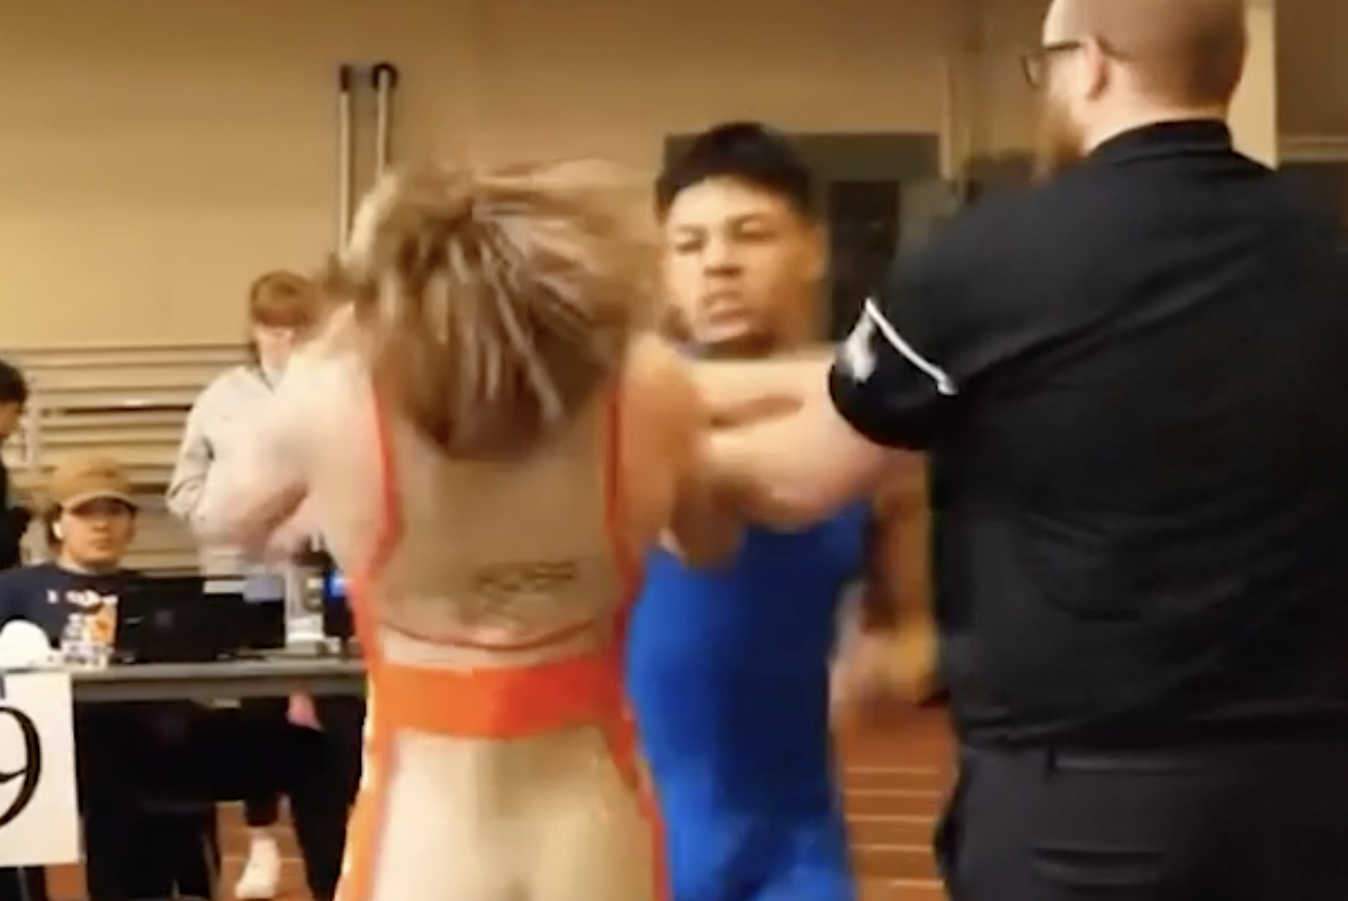 WATCH: Illinois Youth Wrestler Sucker Punched After Match While Going For Handshake